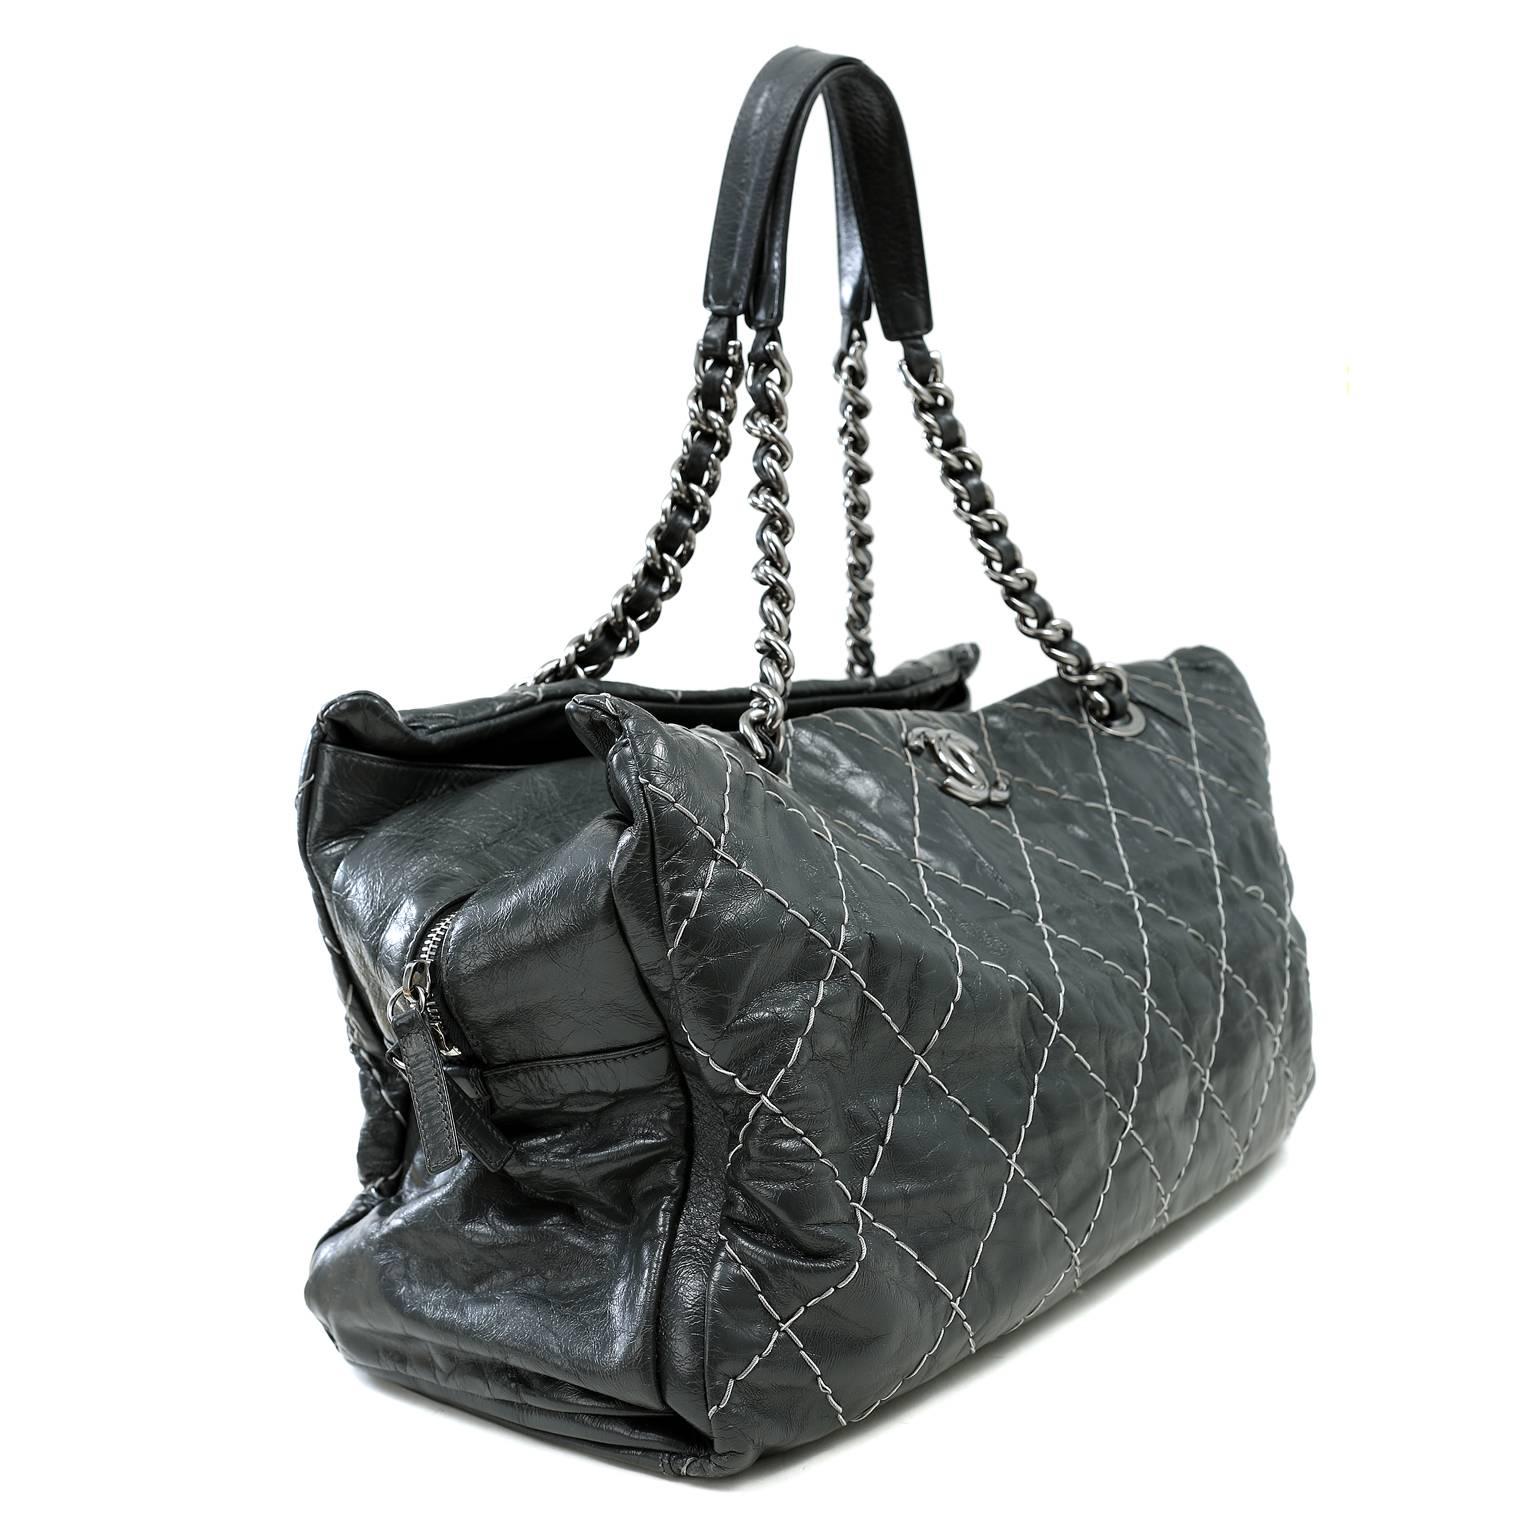 Chanel Grey Contrast Stitched Leather XXL Day Bag- Pristine
  Versatile and chic, this very roomy tote is ready for anything.
 
Dark grey distressed leather is top stitched in signature Chanel diamond pattern with contrasting thread.  A central